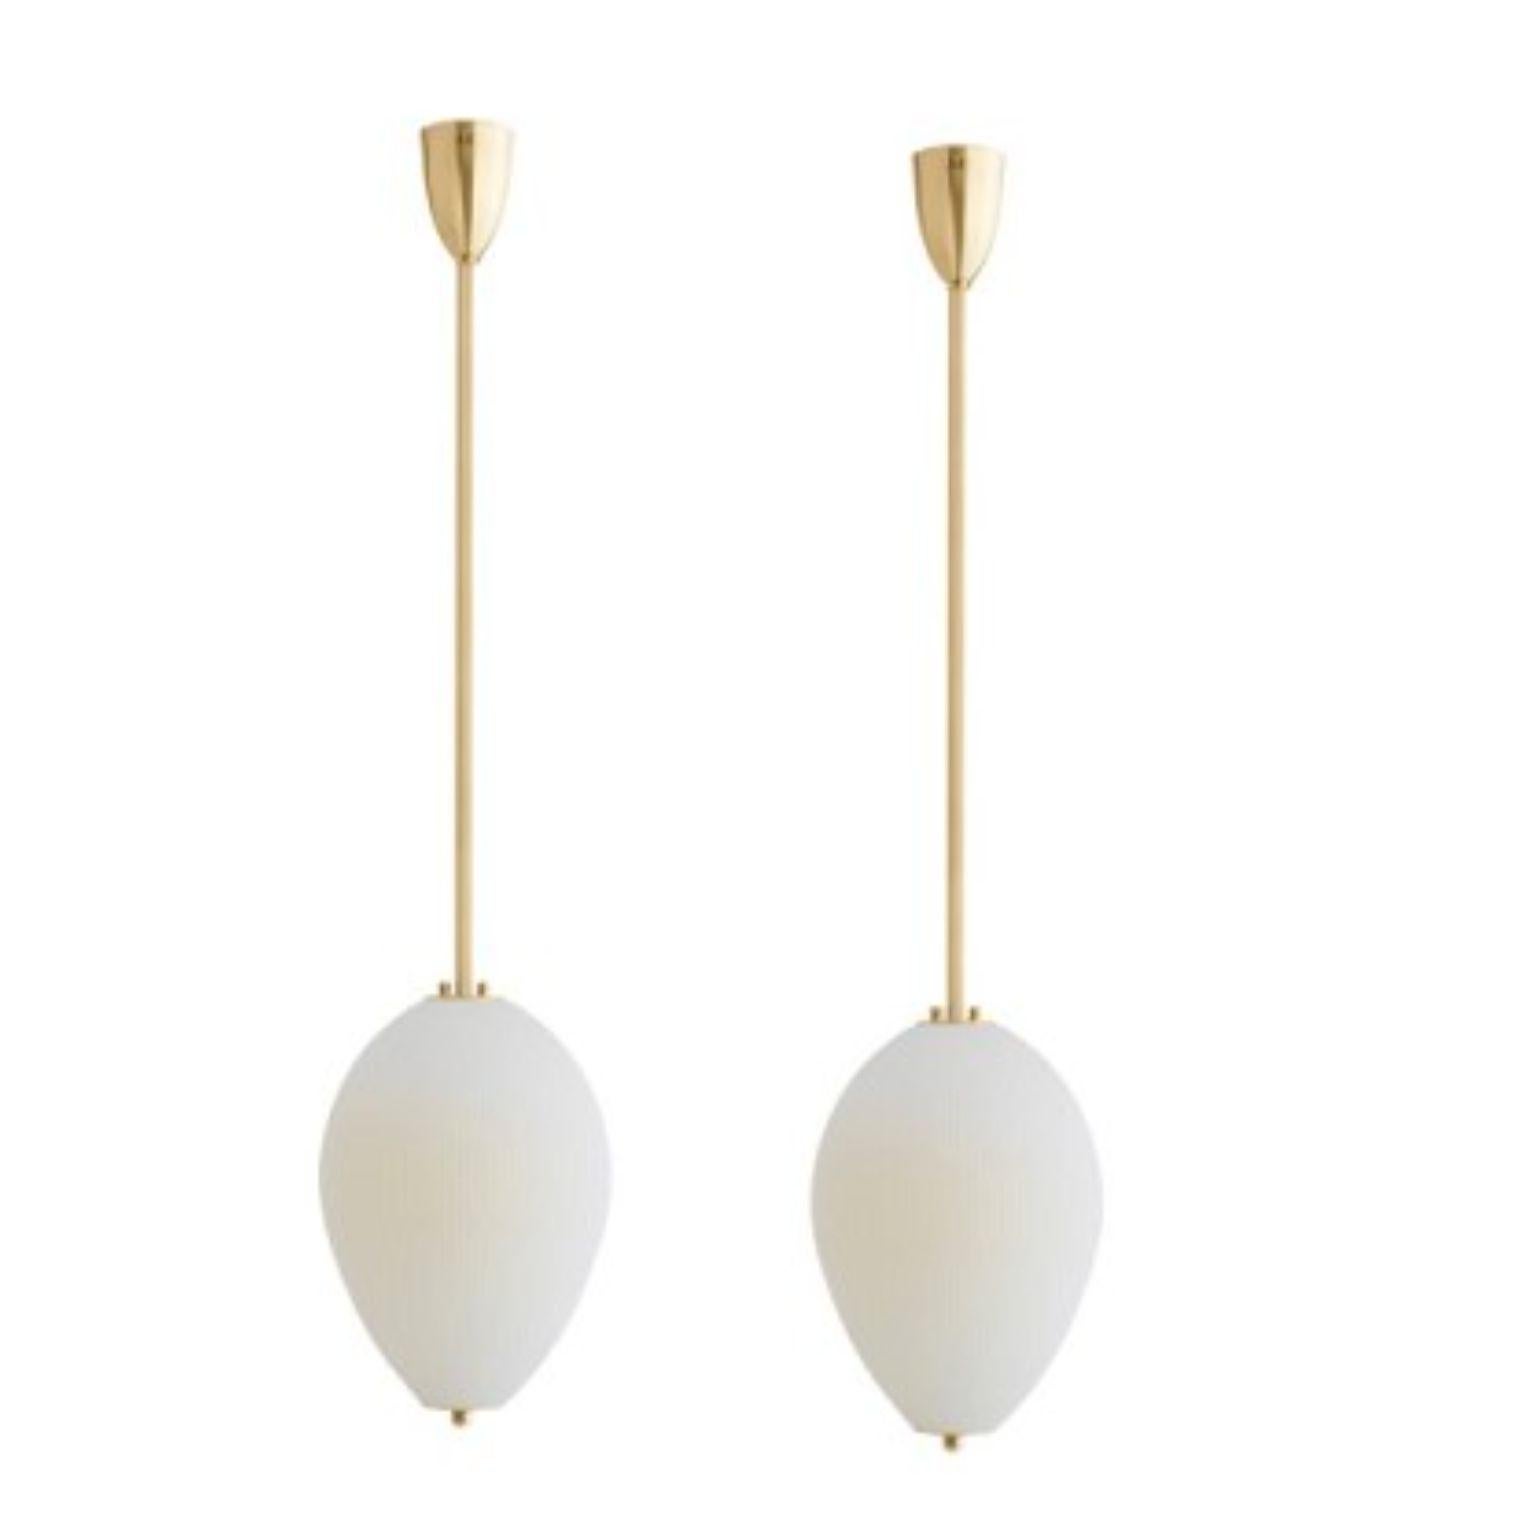 Pendant China 10 by Magic Circus Editions
Dimensions: H 90 x W 32 x D 32 cm, also available in H 110, 130, 150, 175, 190 cm
Materials: brass, mouth blown glass sculpted with a diamond saw
Color: ivory

Available finishes: brass, nickel
Available